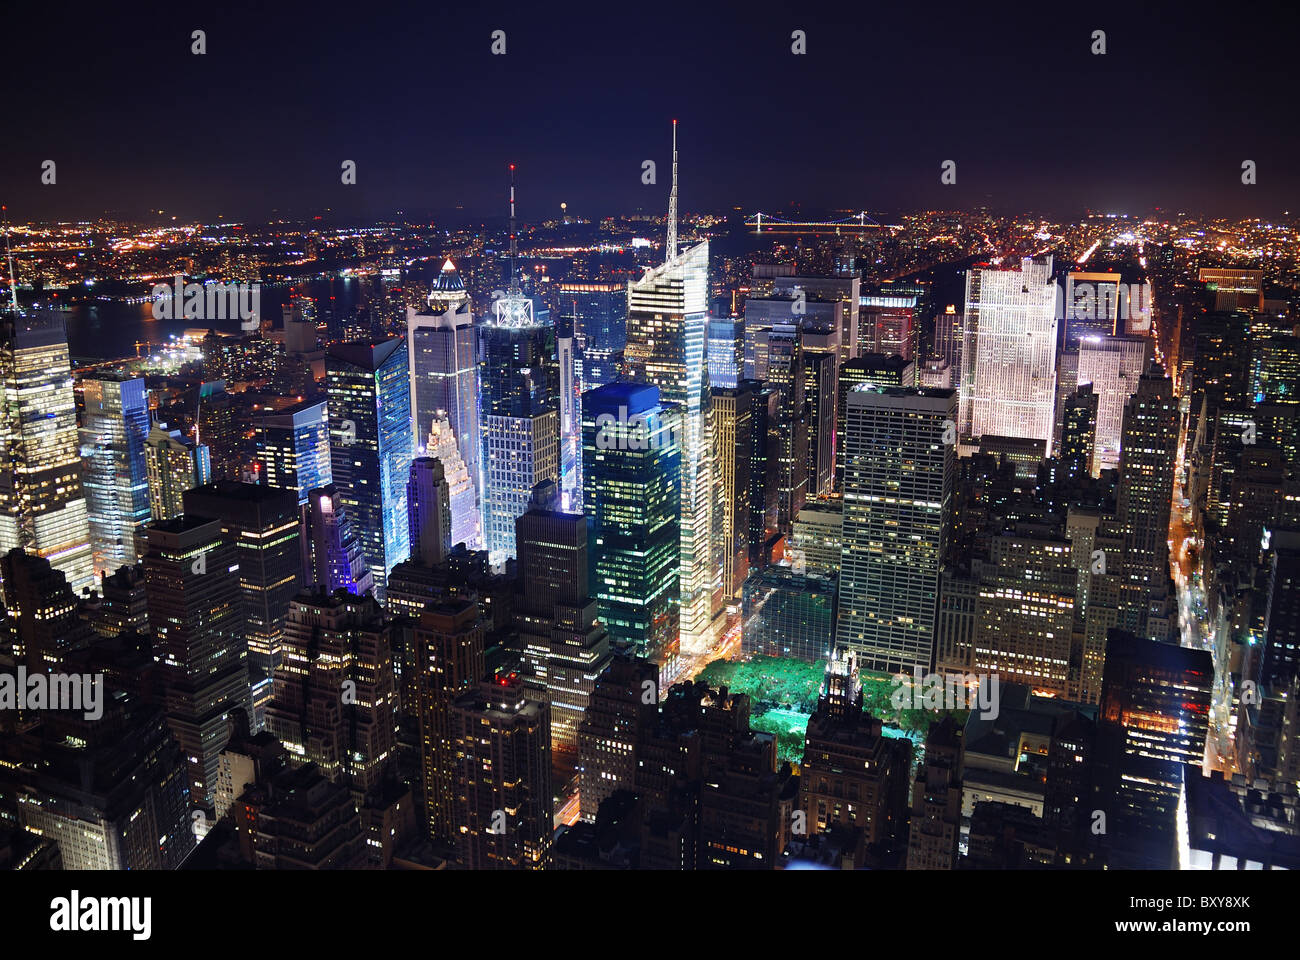 New York City Manhattan Times Square Panorama View At Night With Office Building Skyscrapers Skyline Illuminated Stock Photo Alamy